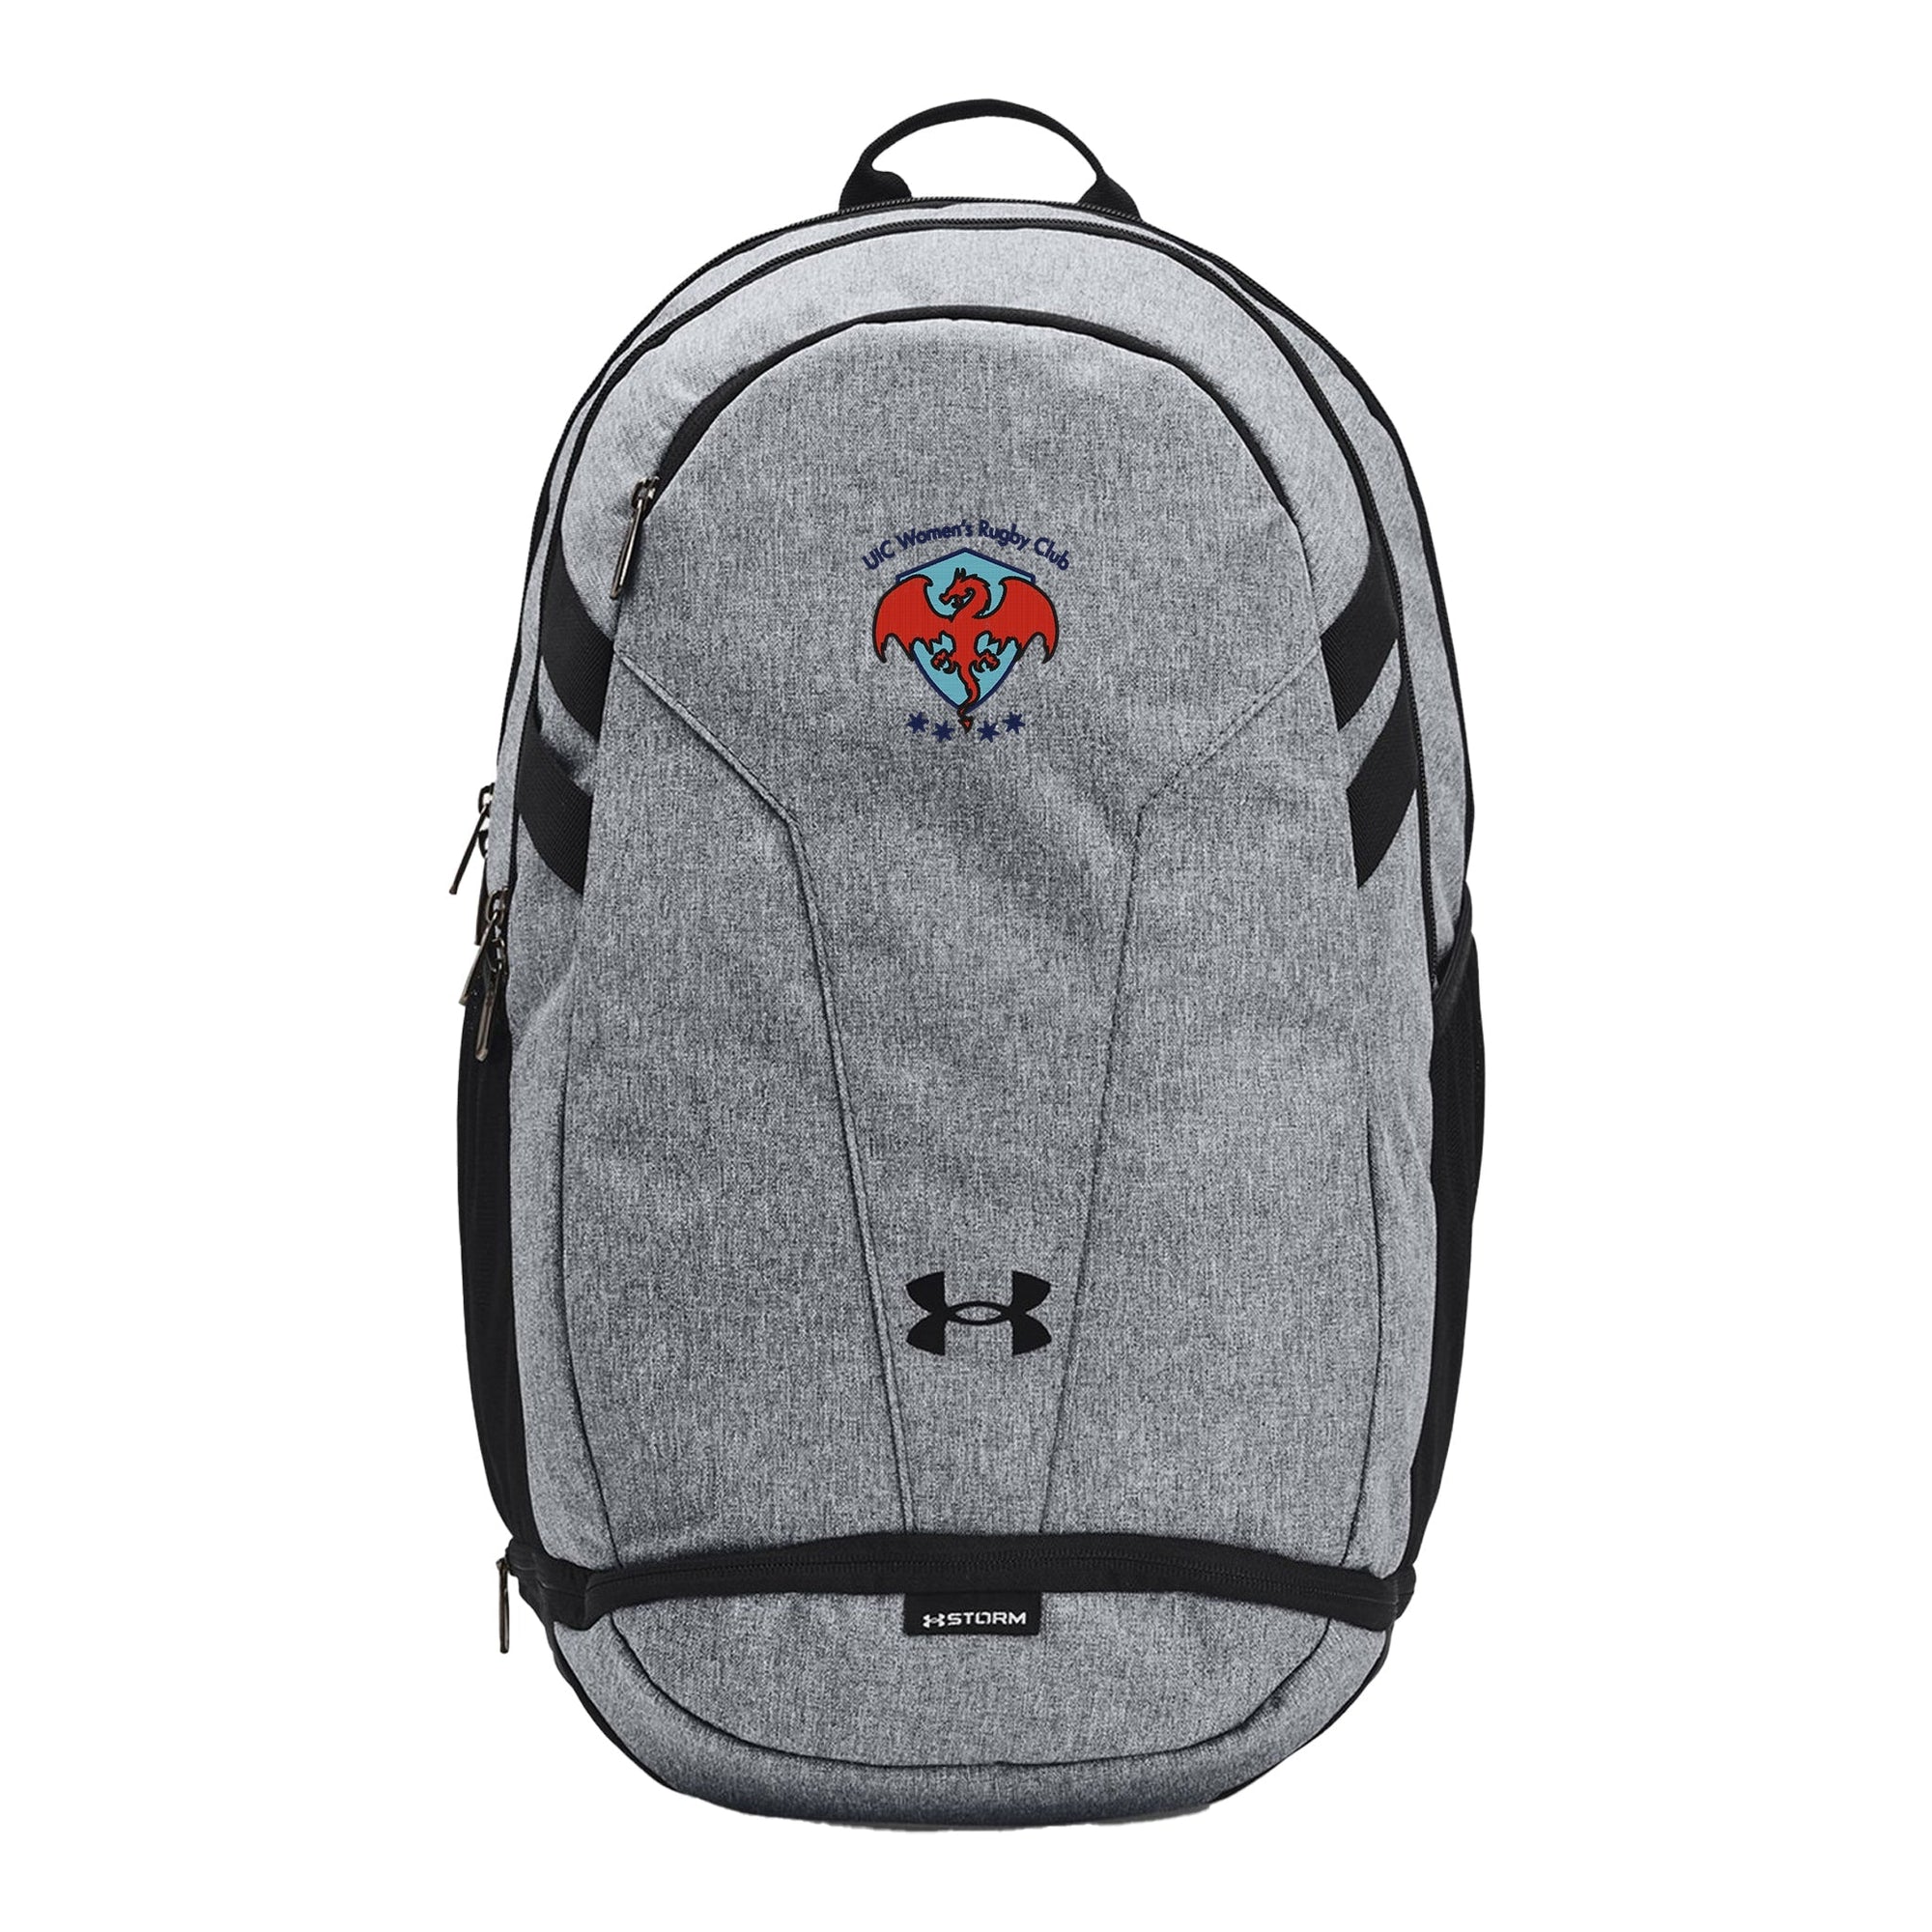 Rugby Imports UICWR Hustle 5.0 Backpack